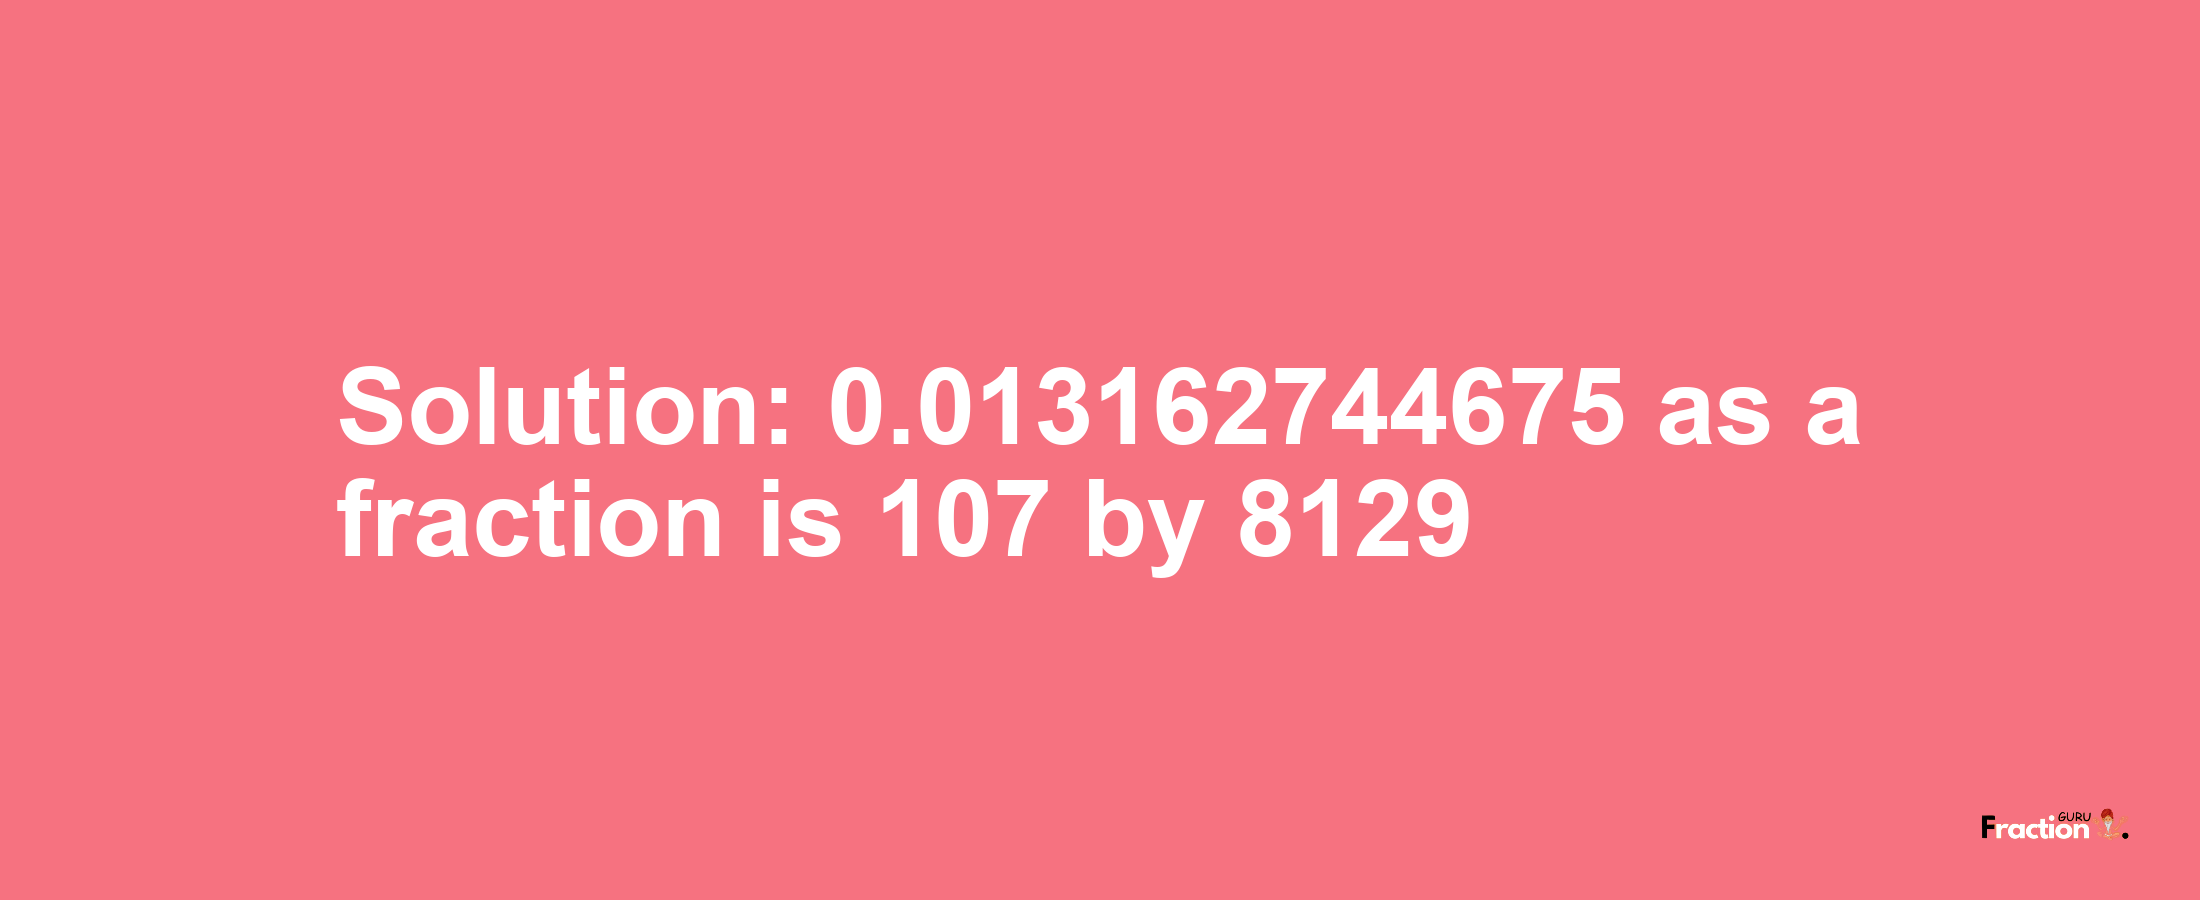 Solution:0.013162744675 as a fraction is 107/8129